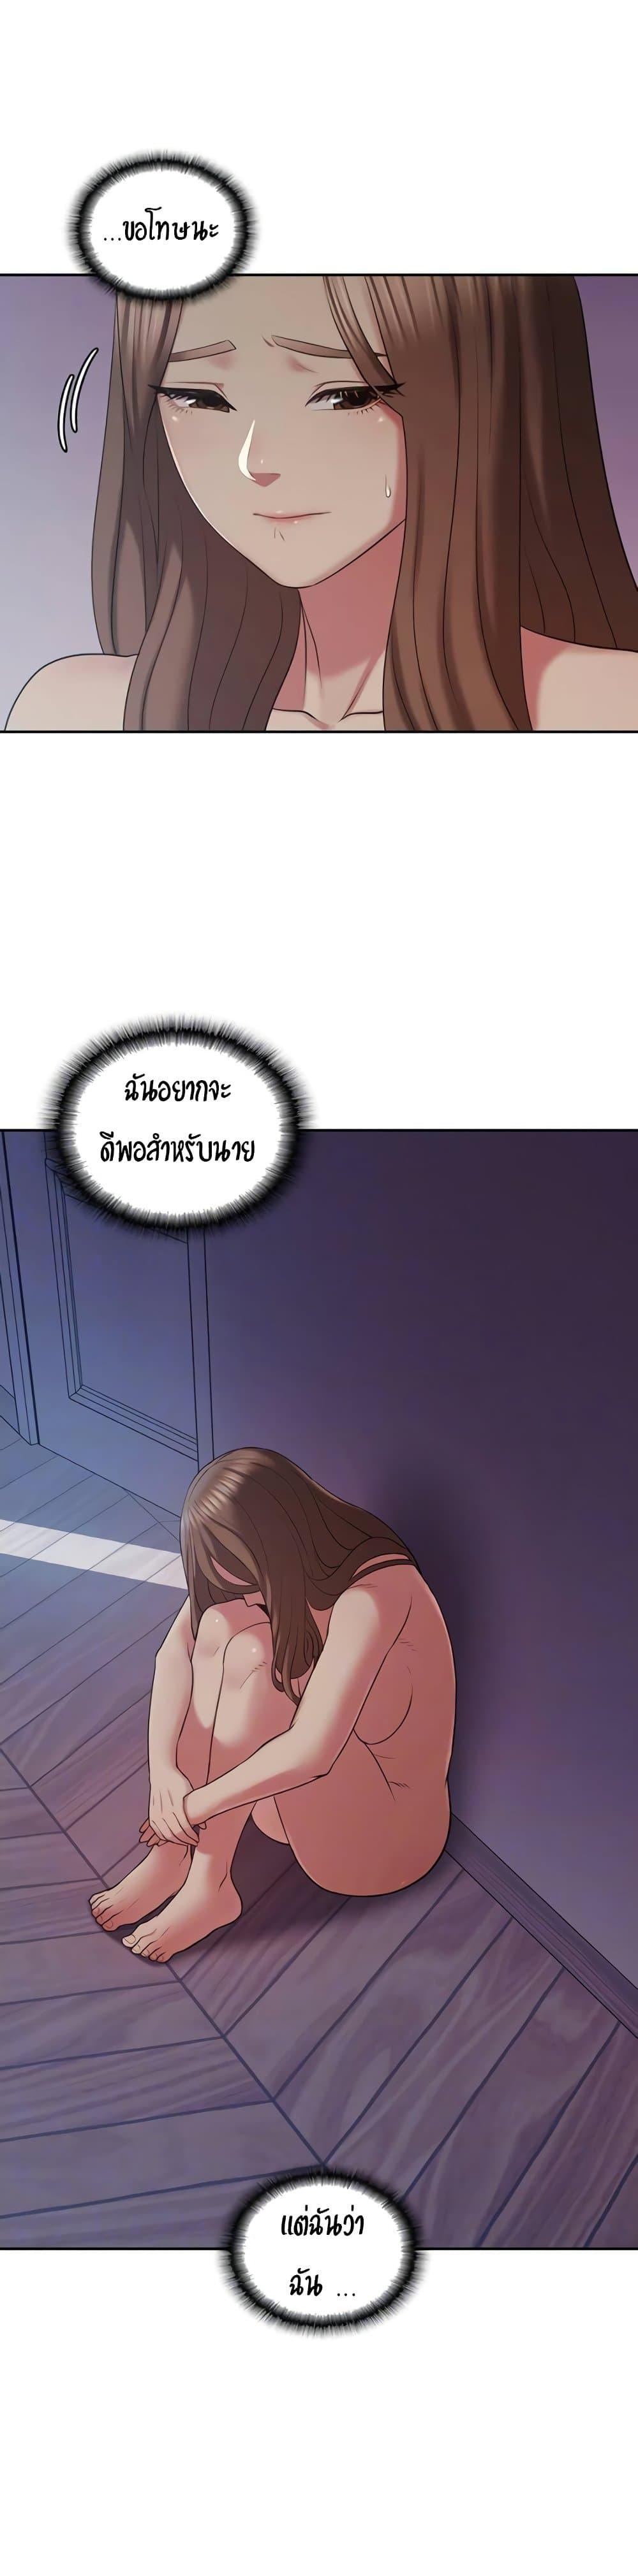 Sexual Consulting 2 ภาพ 5